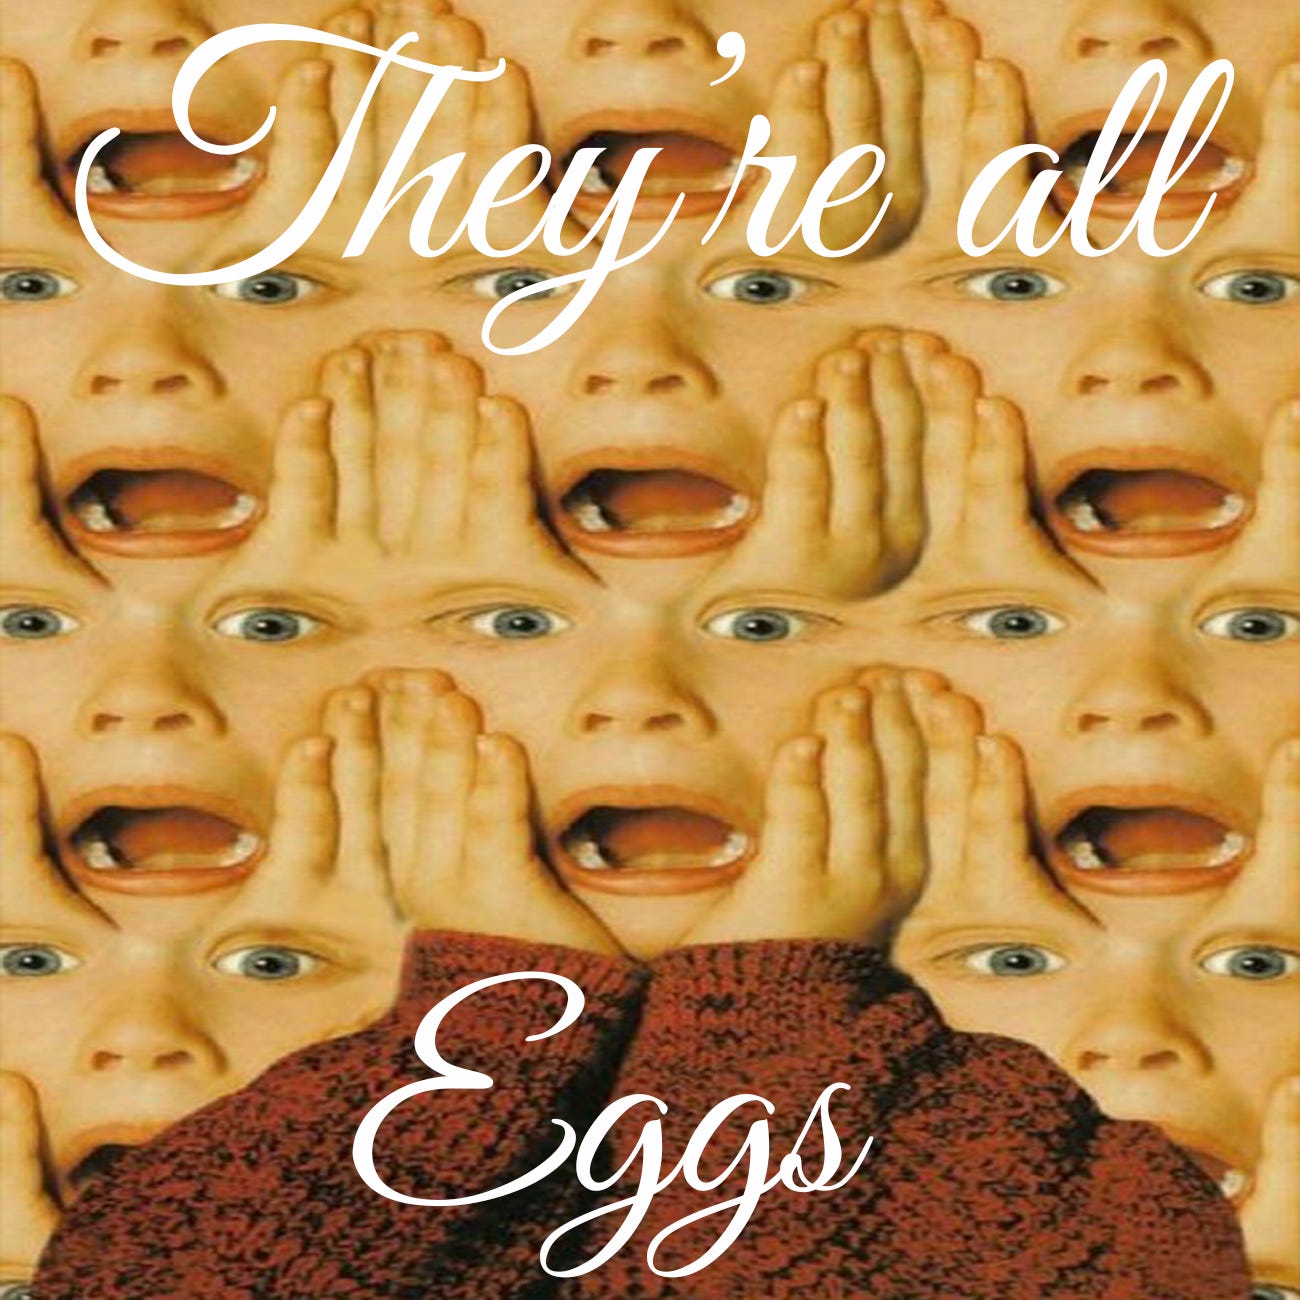 they're all eggs